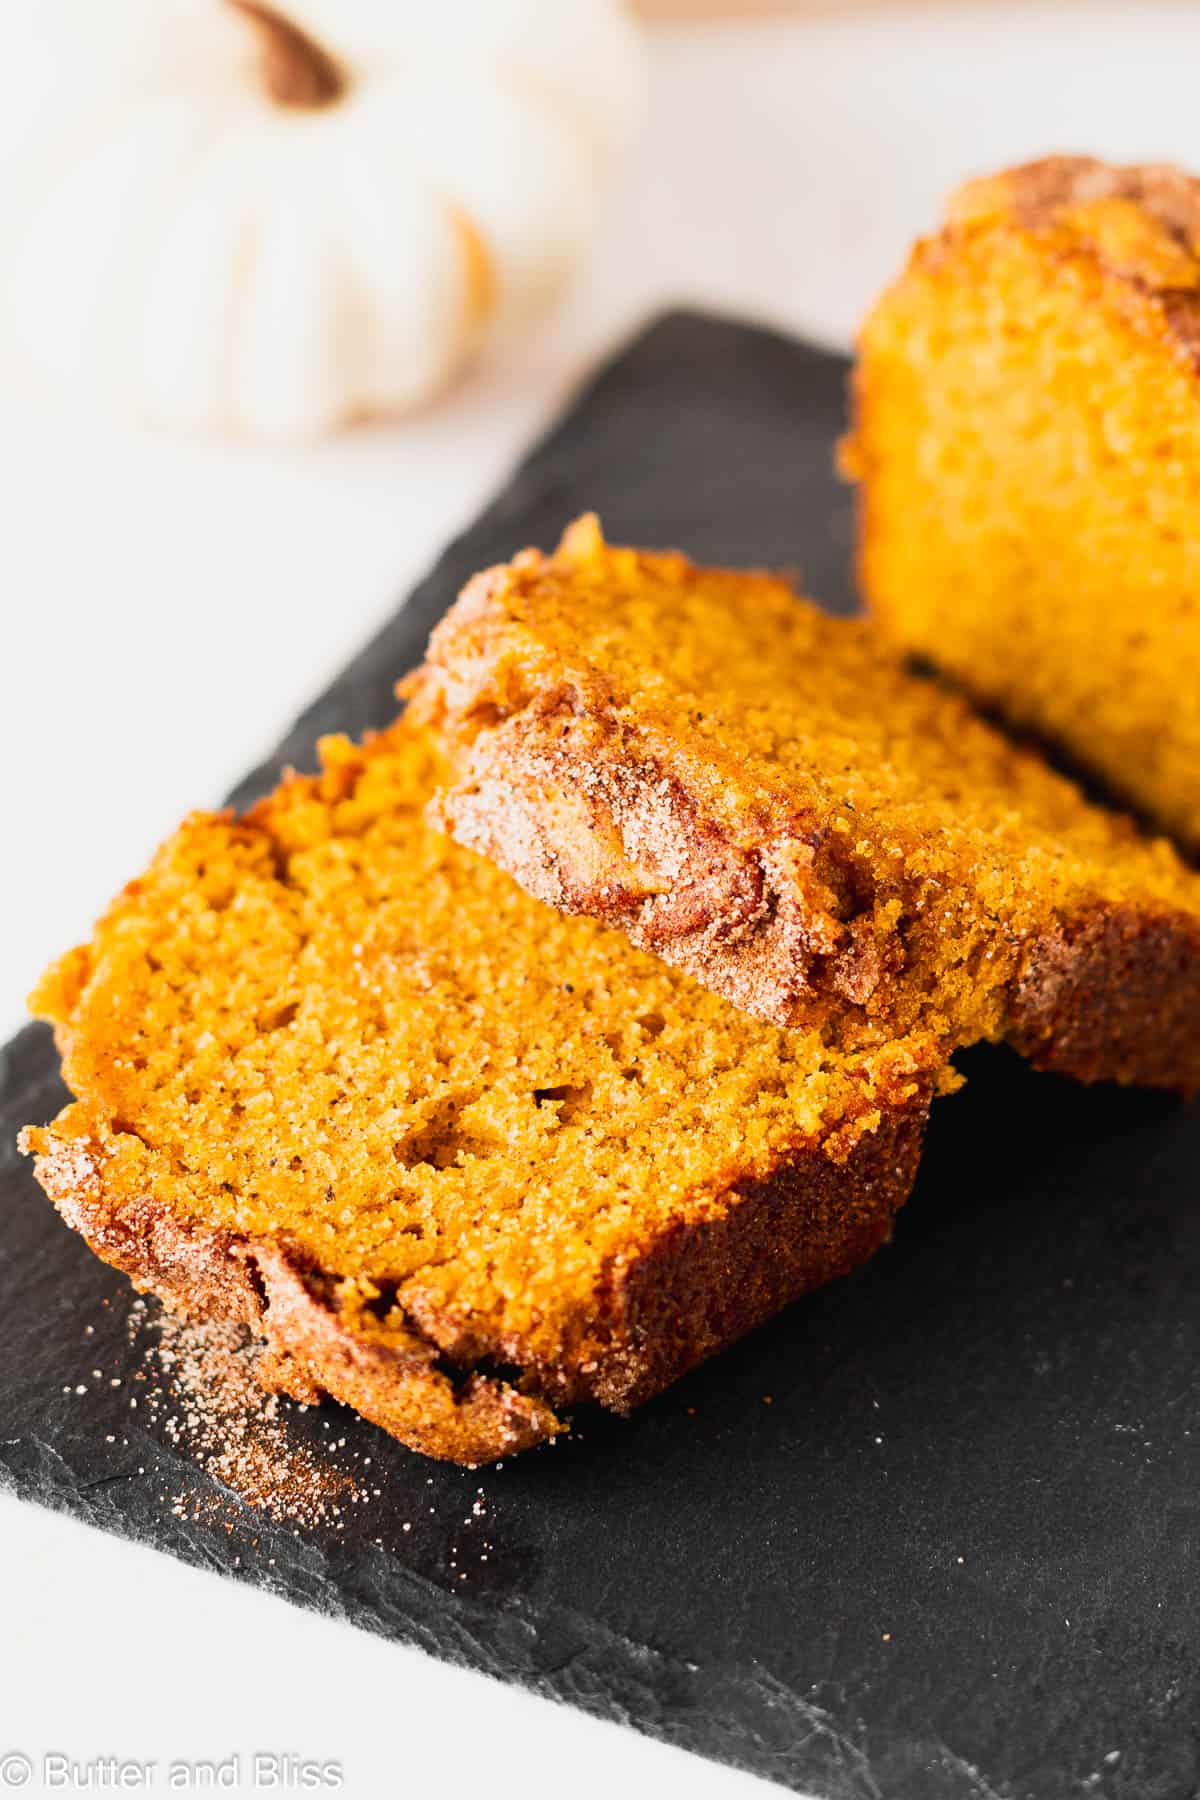 Slices of moist pumpkin bread with cinnamon topping on a small black plate.